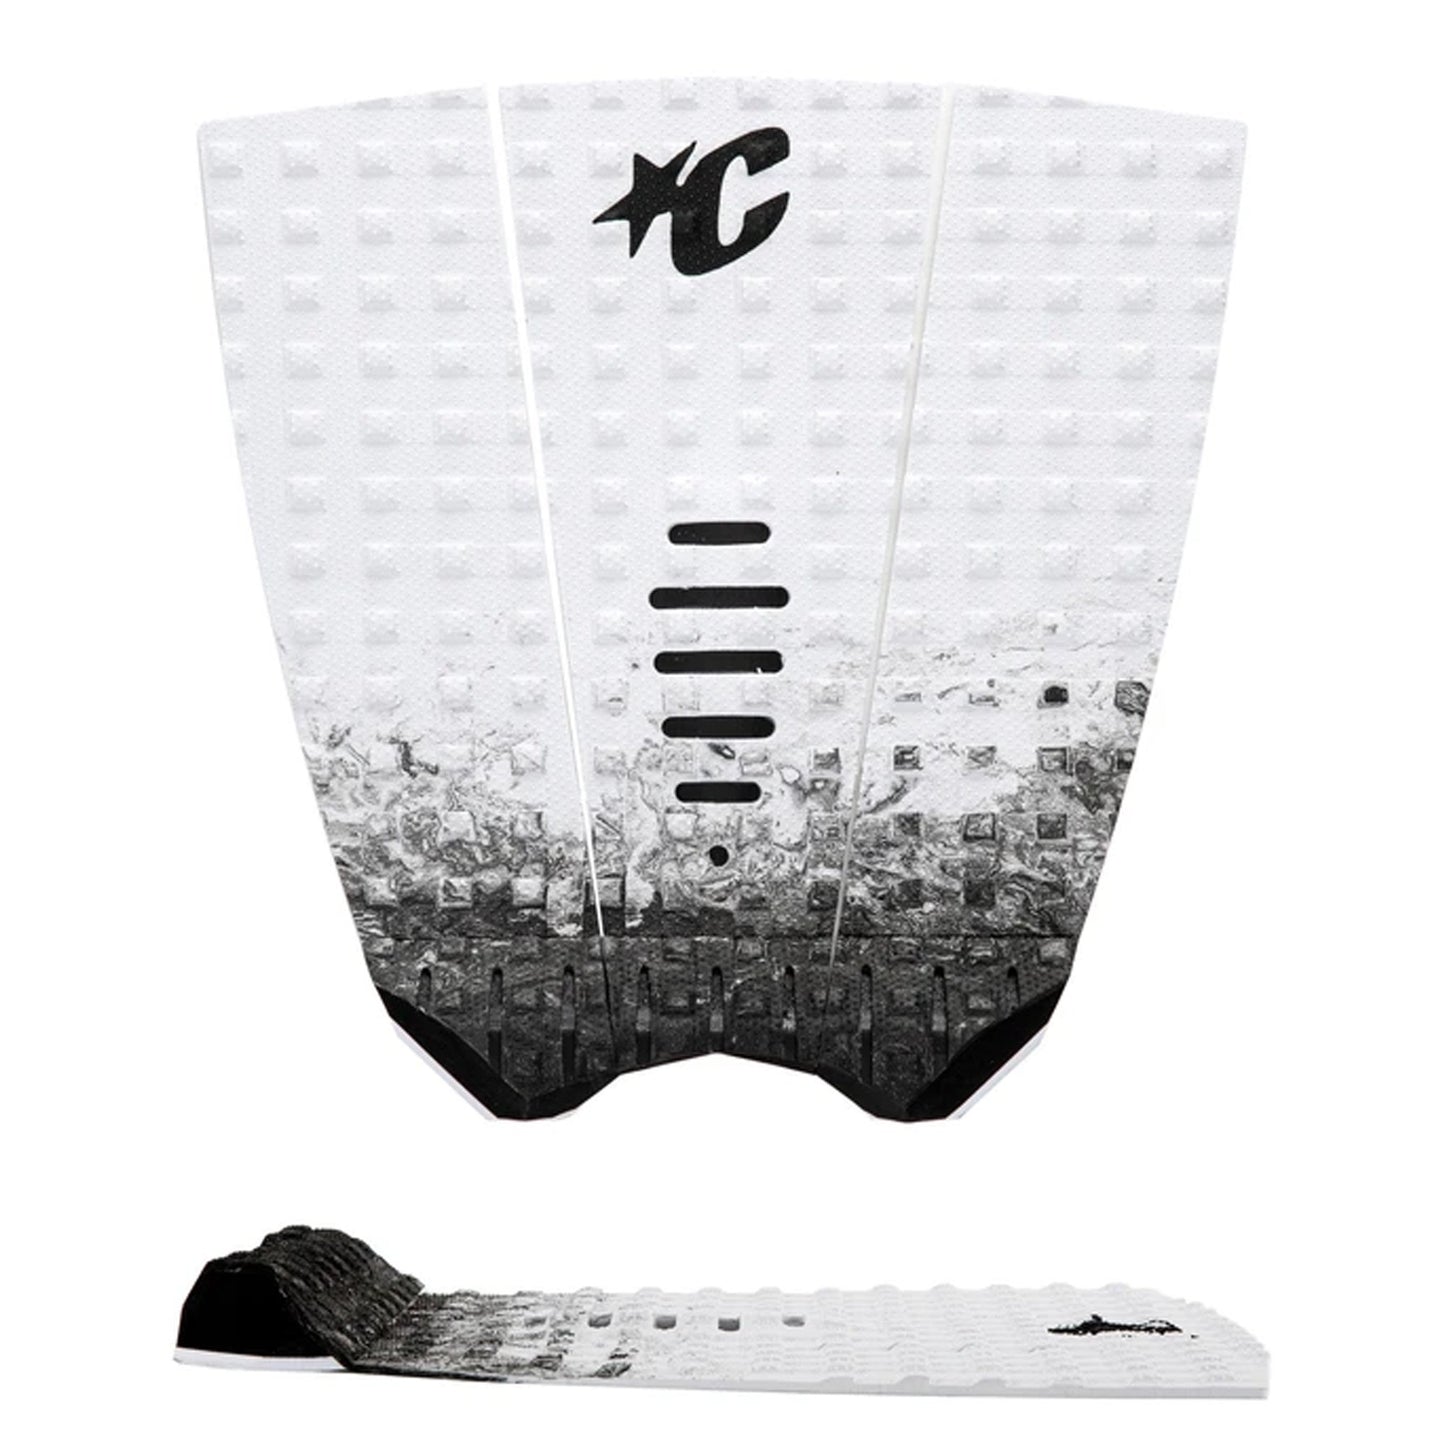 Creatures of Leisure Mick Fanning Performance Traction Traction Pad White Black Fade Lite